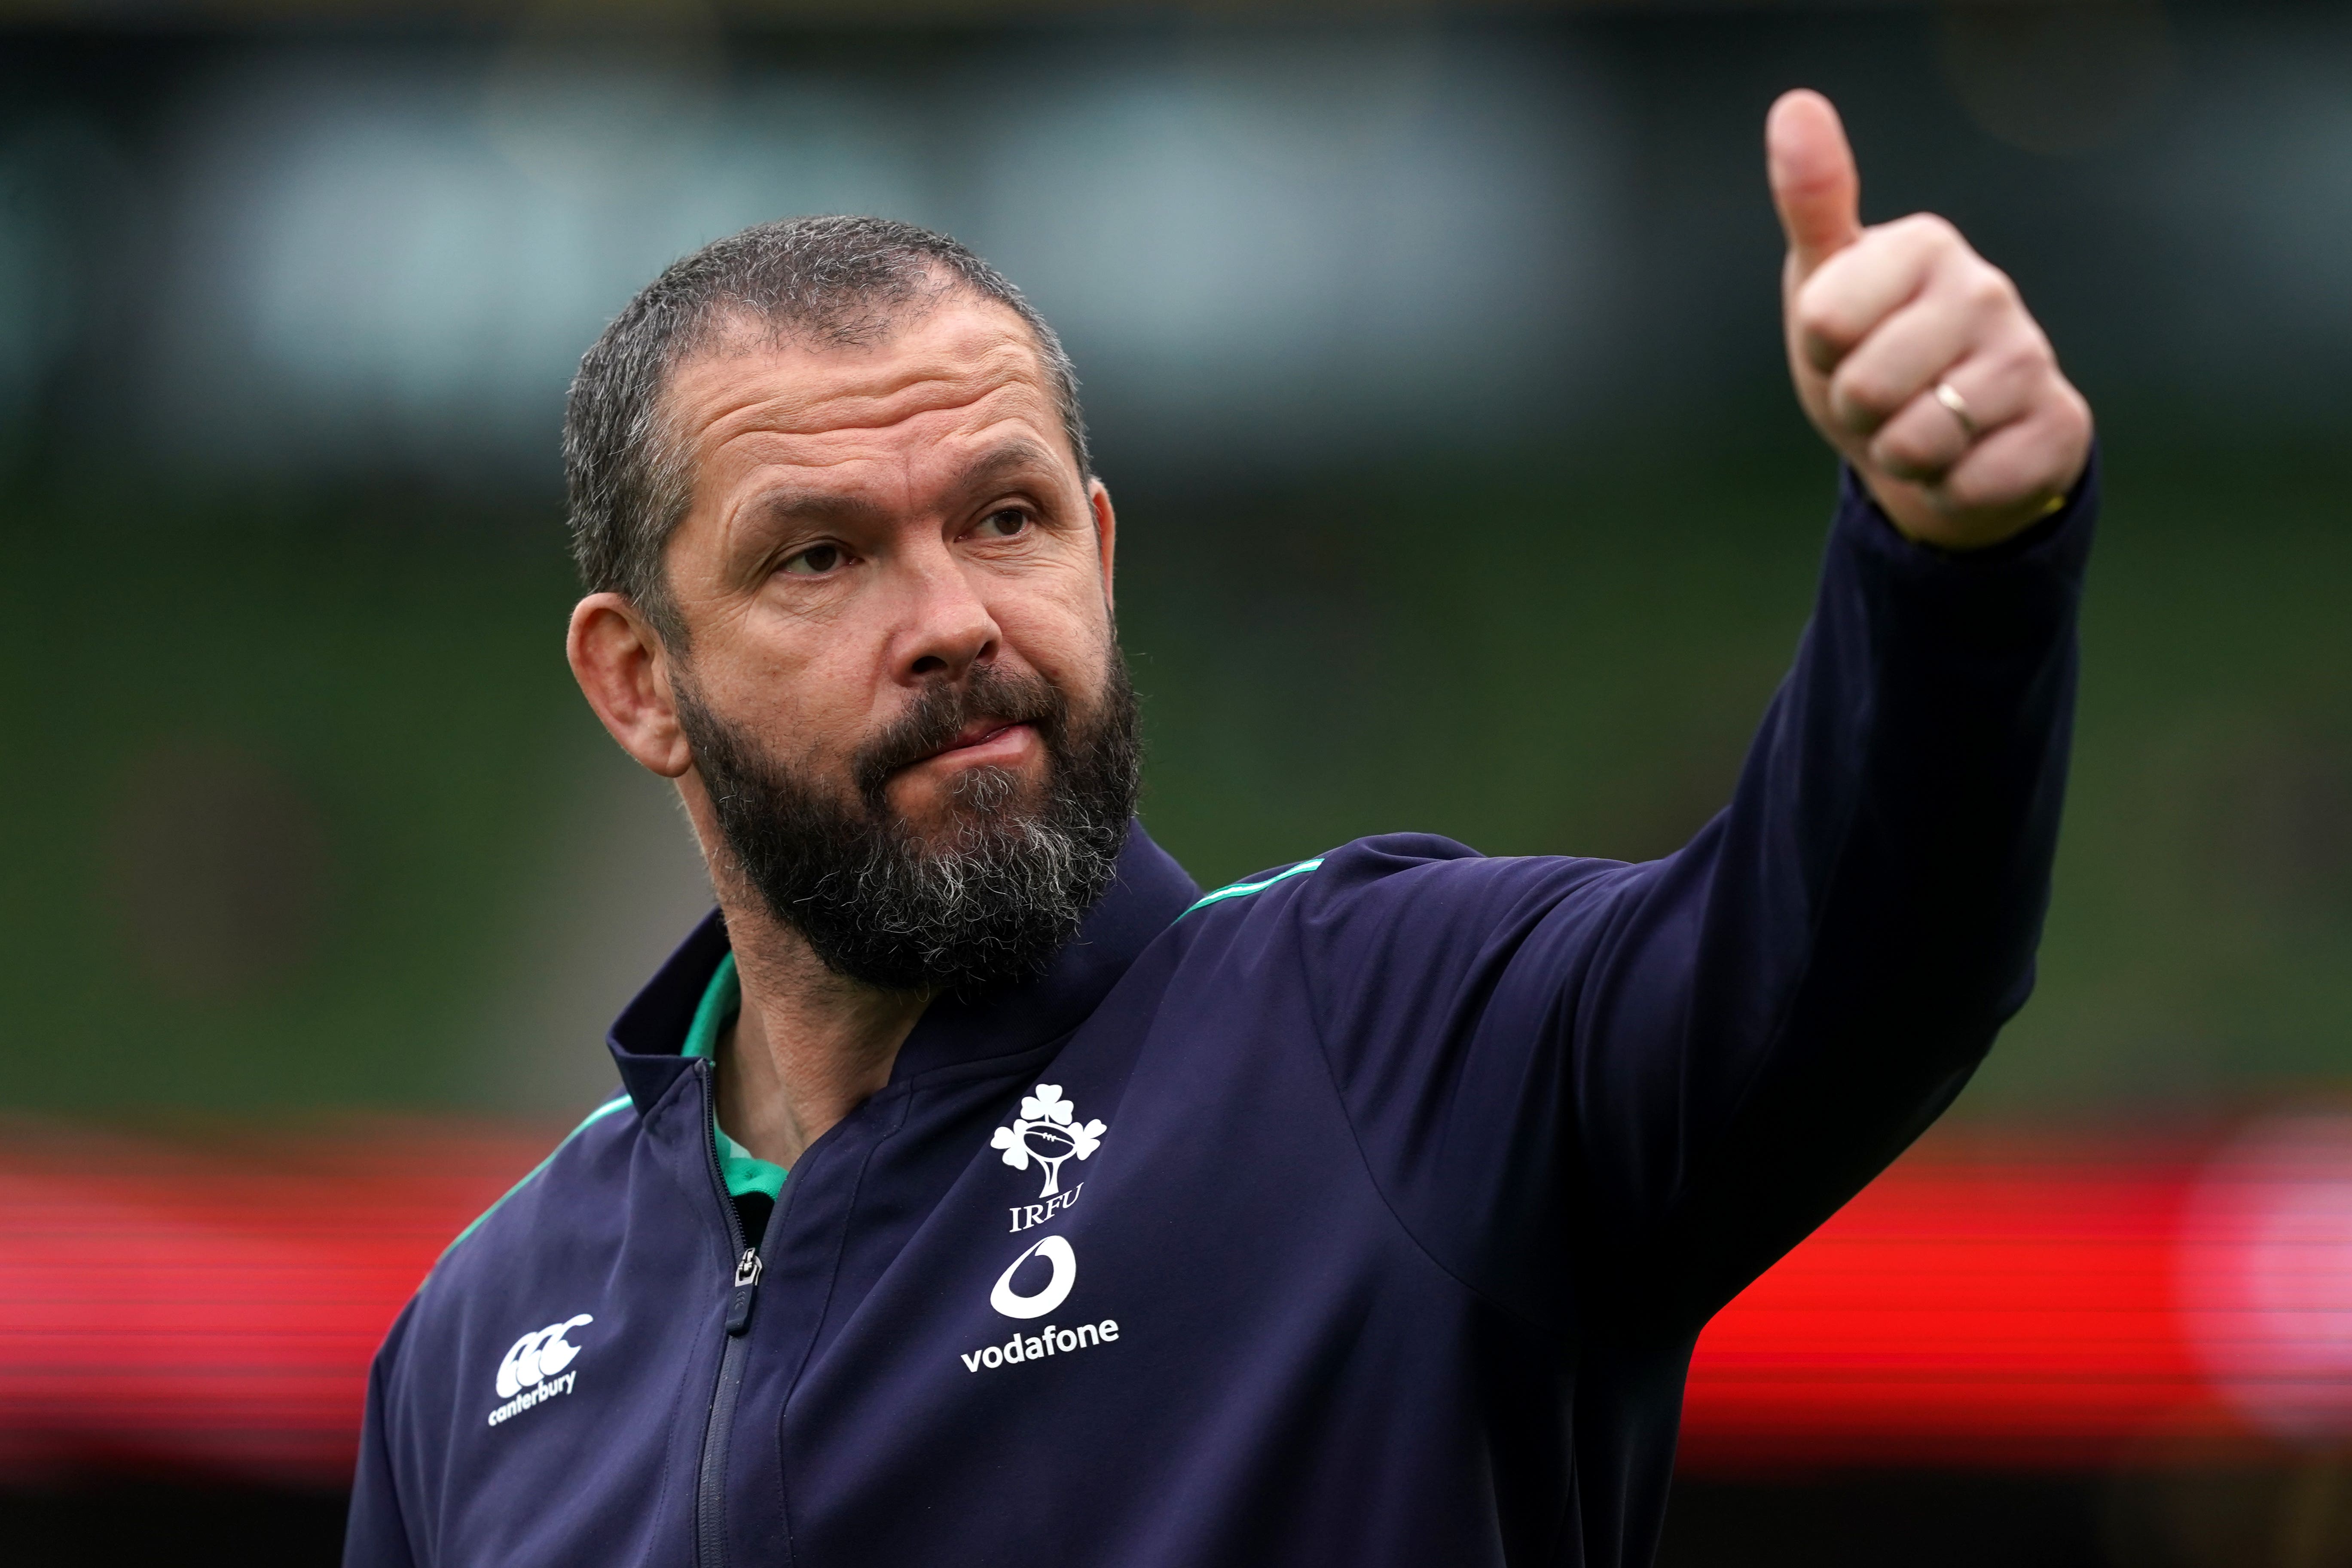 Andy Farrell has transformed Ireland into perhaps the finest team in Six Nations history